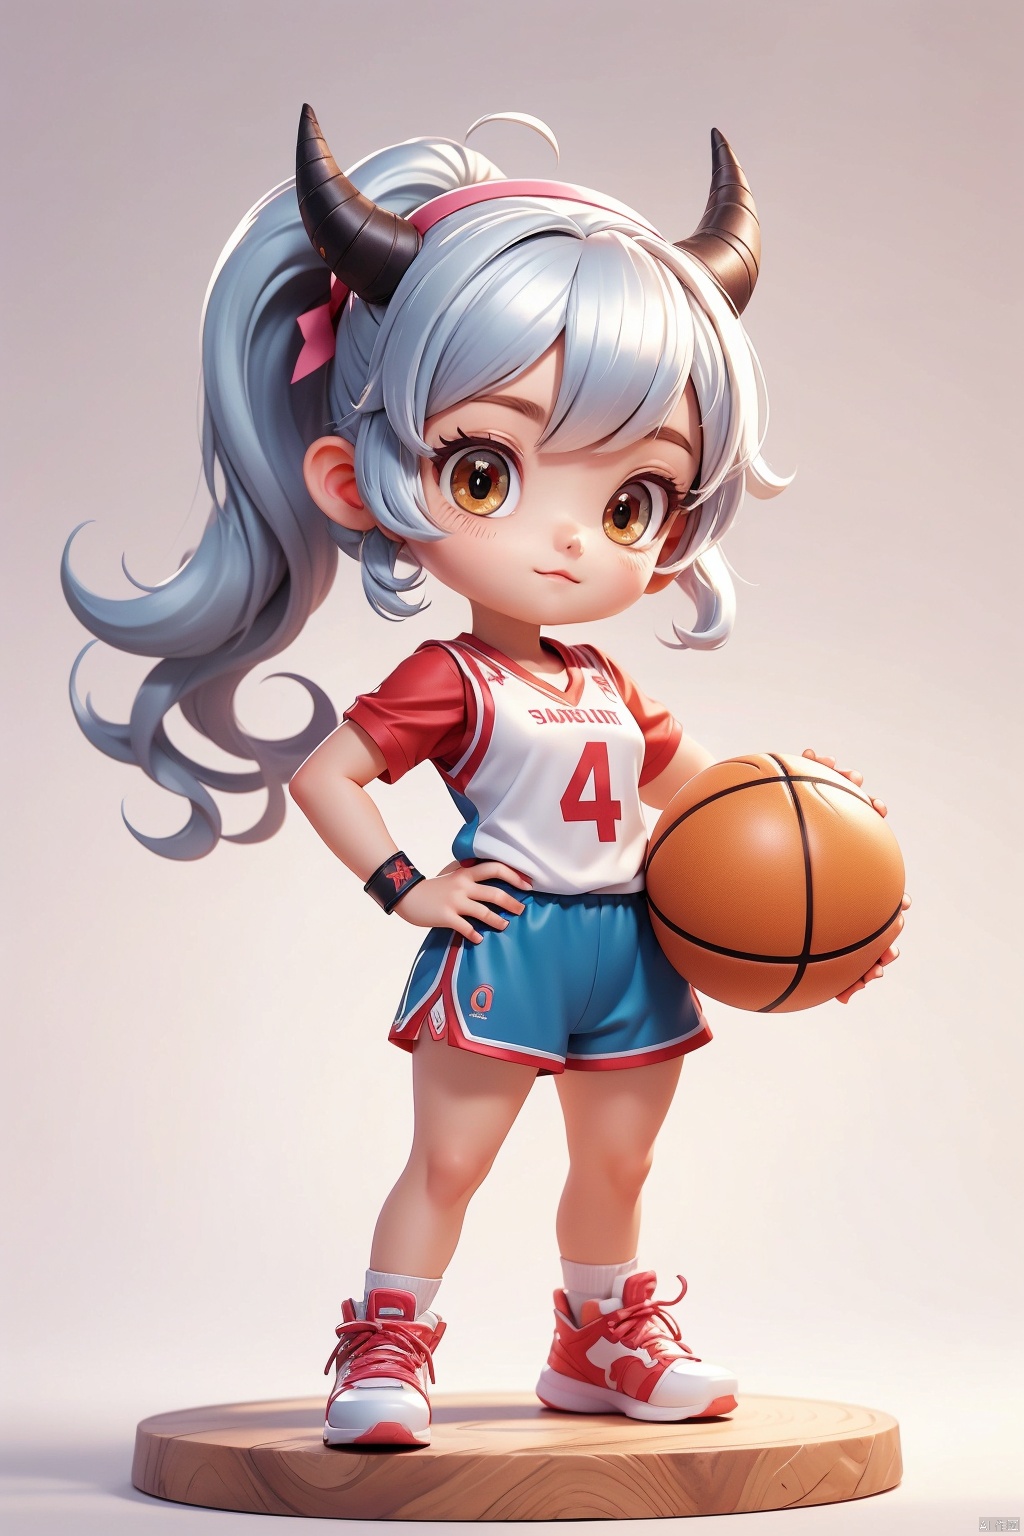 1 girl, 3 years old, hands on hips, solo, (Q version :1.6), IP, determined expression, horns, animal features, blush, basketball uniform, simple white background, silver hair, side ponytail,